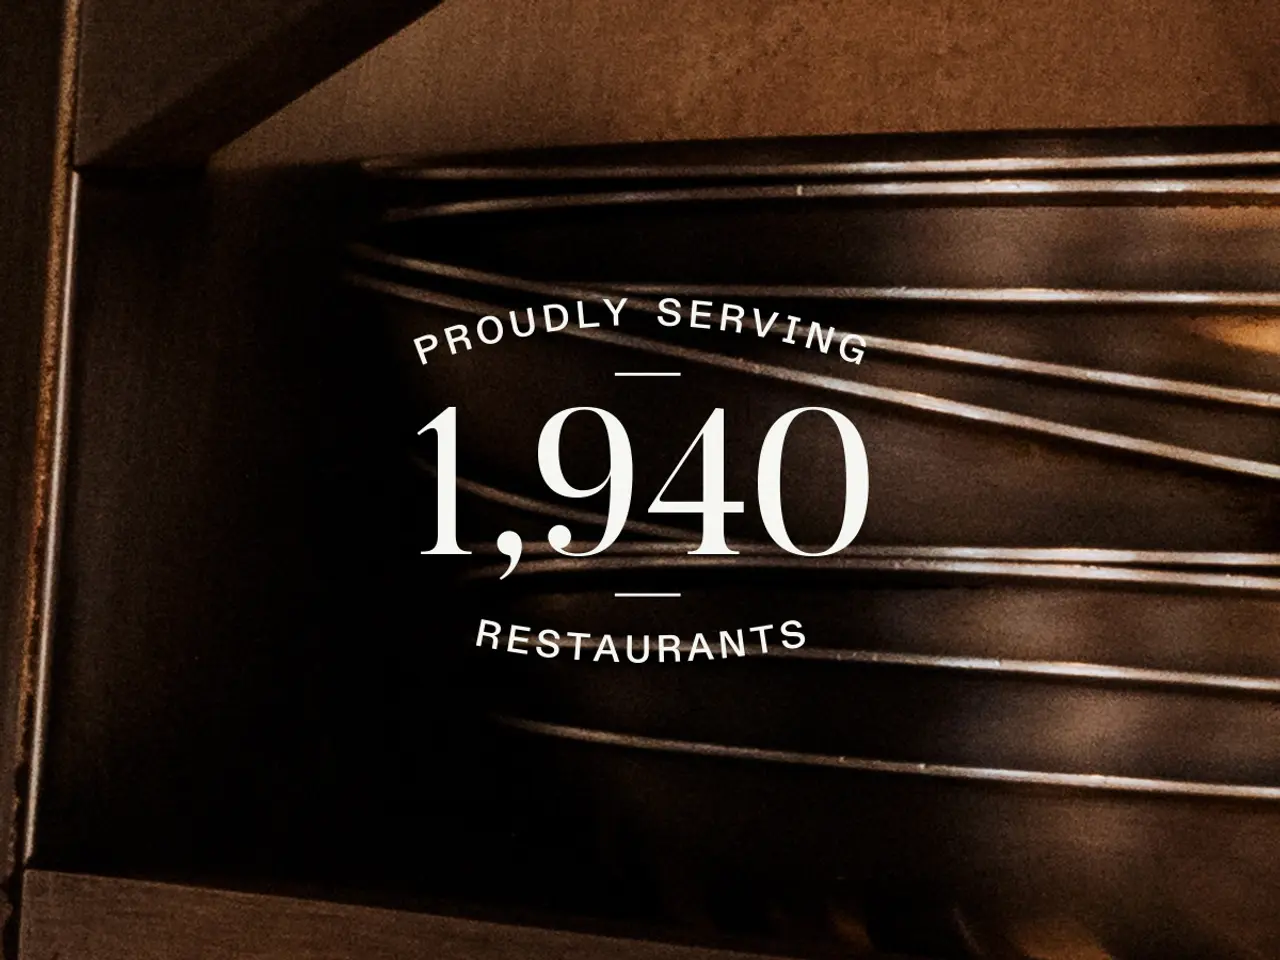 A metallic plaque displays "PROUDLY SERVING 1,940 RESTAURANTS" against a dark background with slatted details.